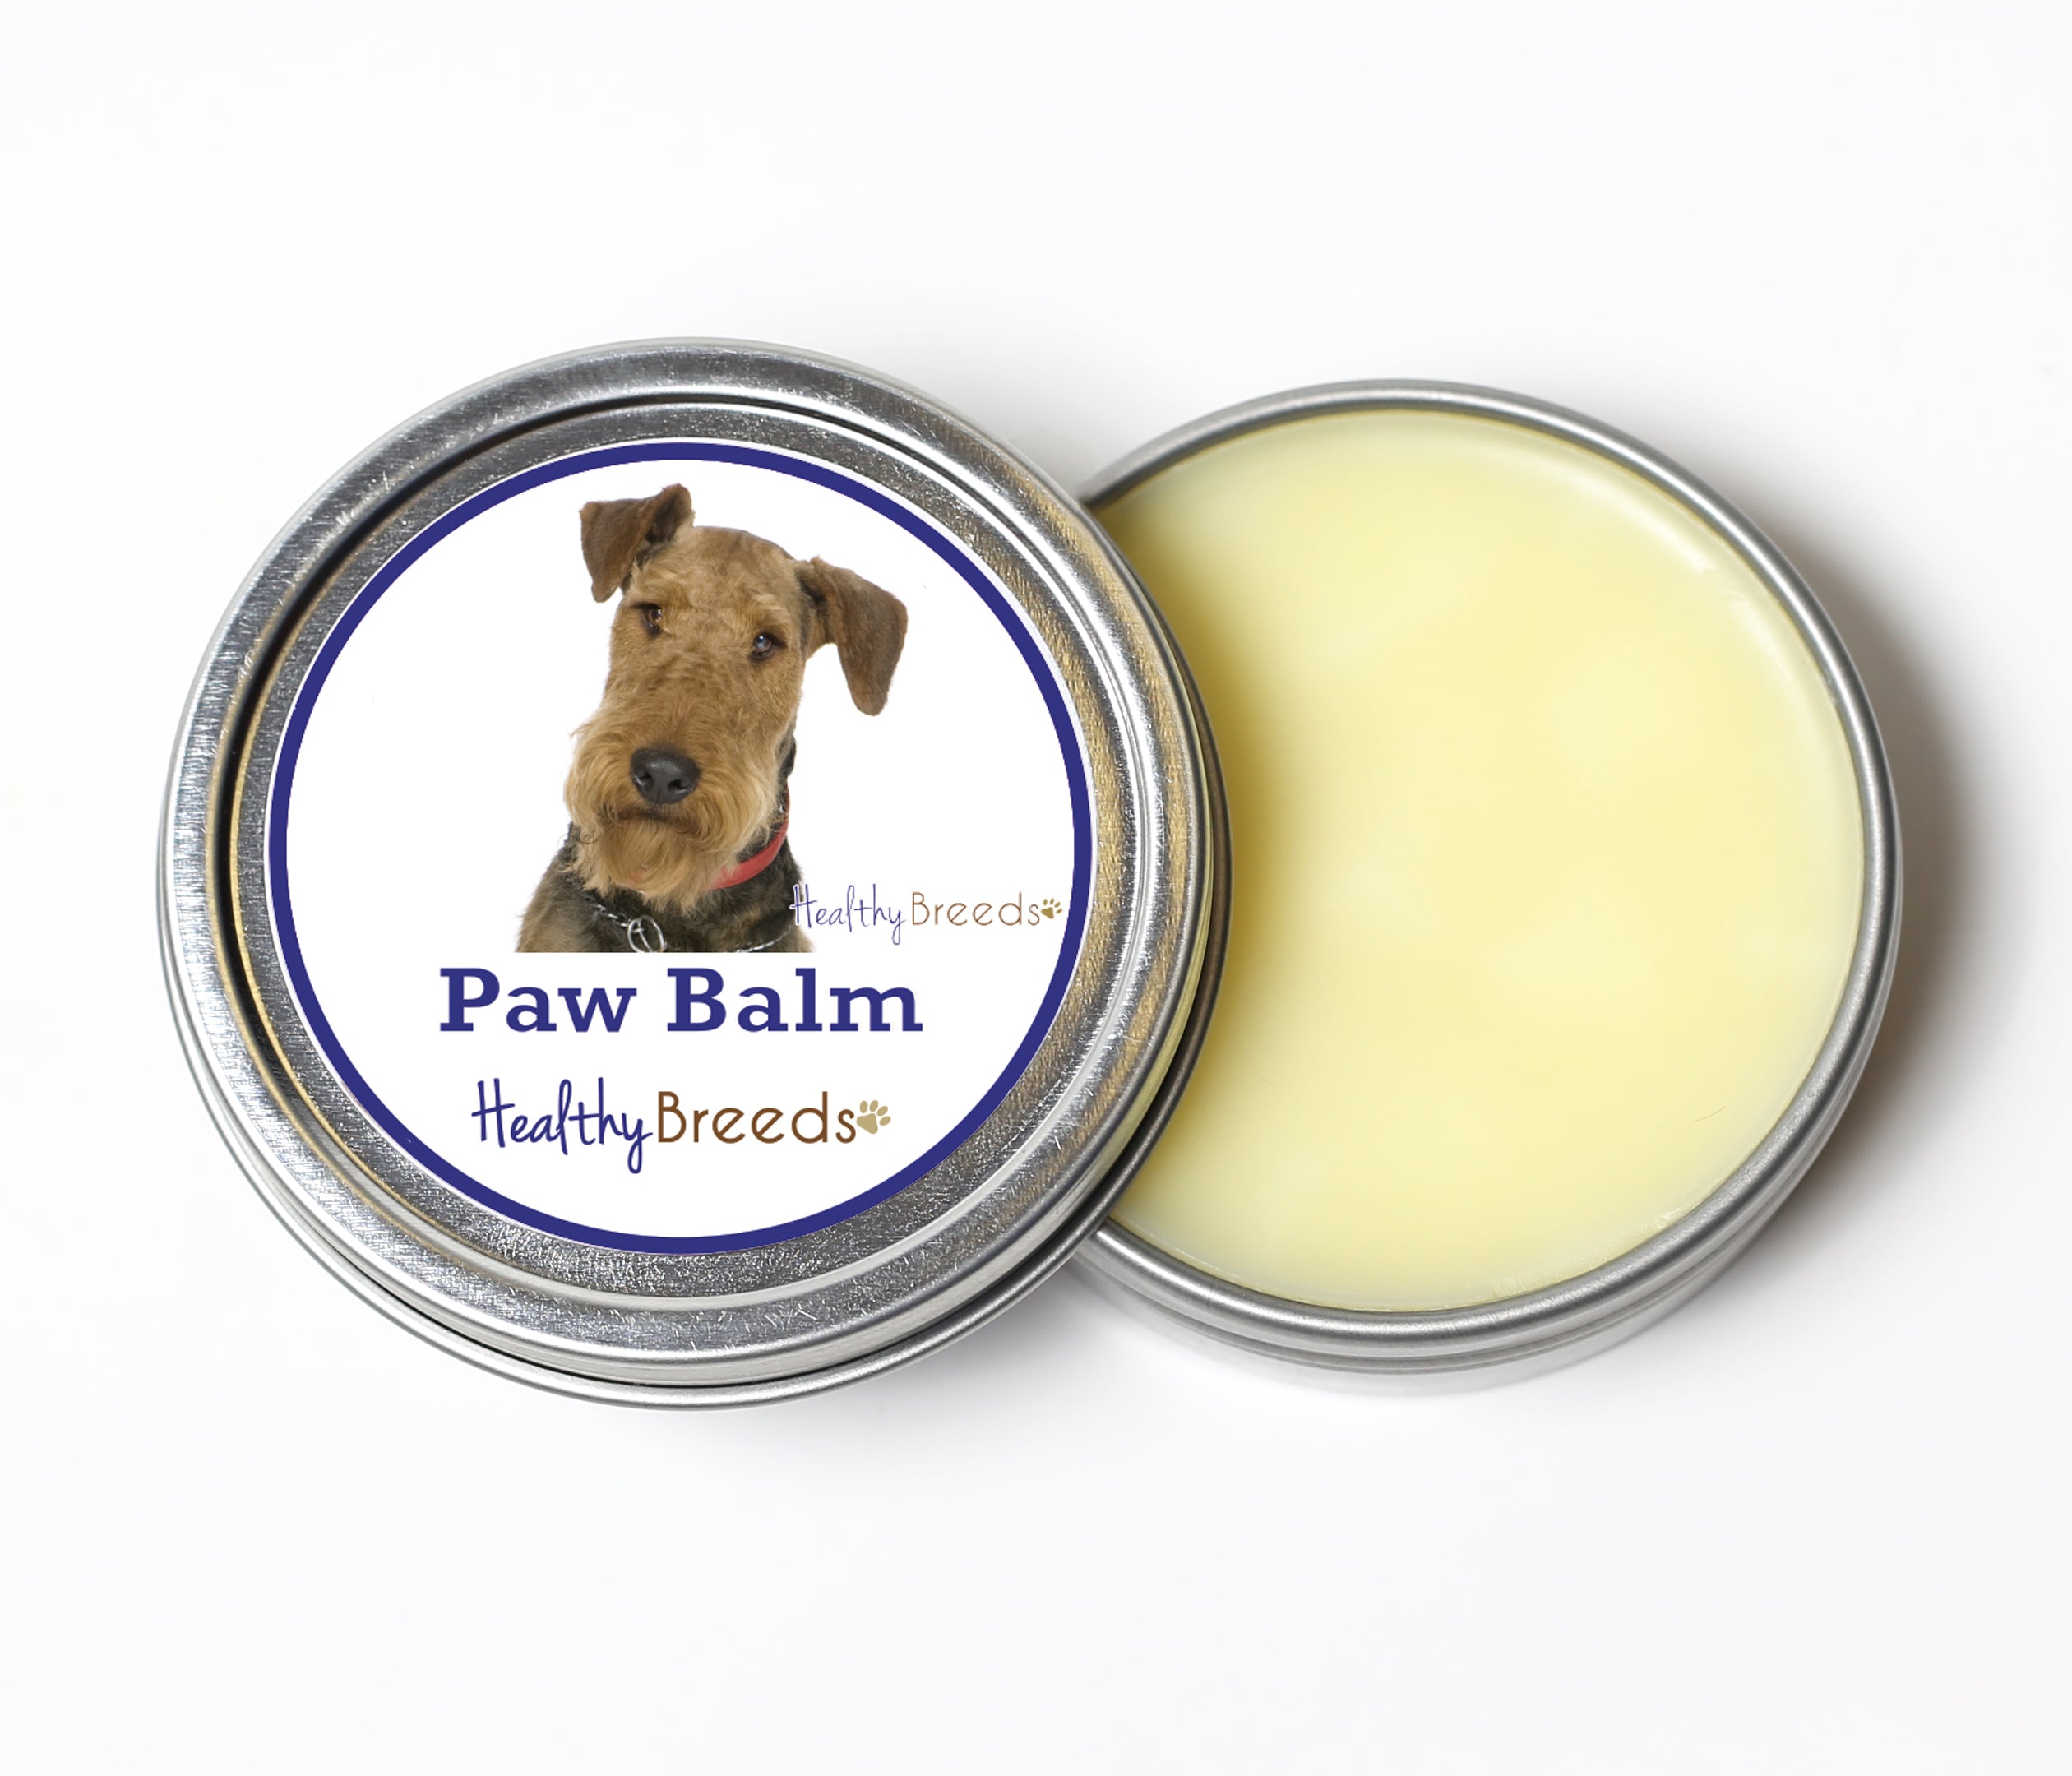 Airedale Terrier Dog Paw Balm 2 oz